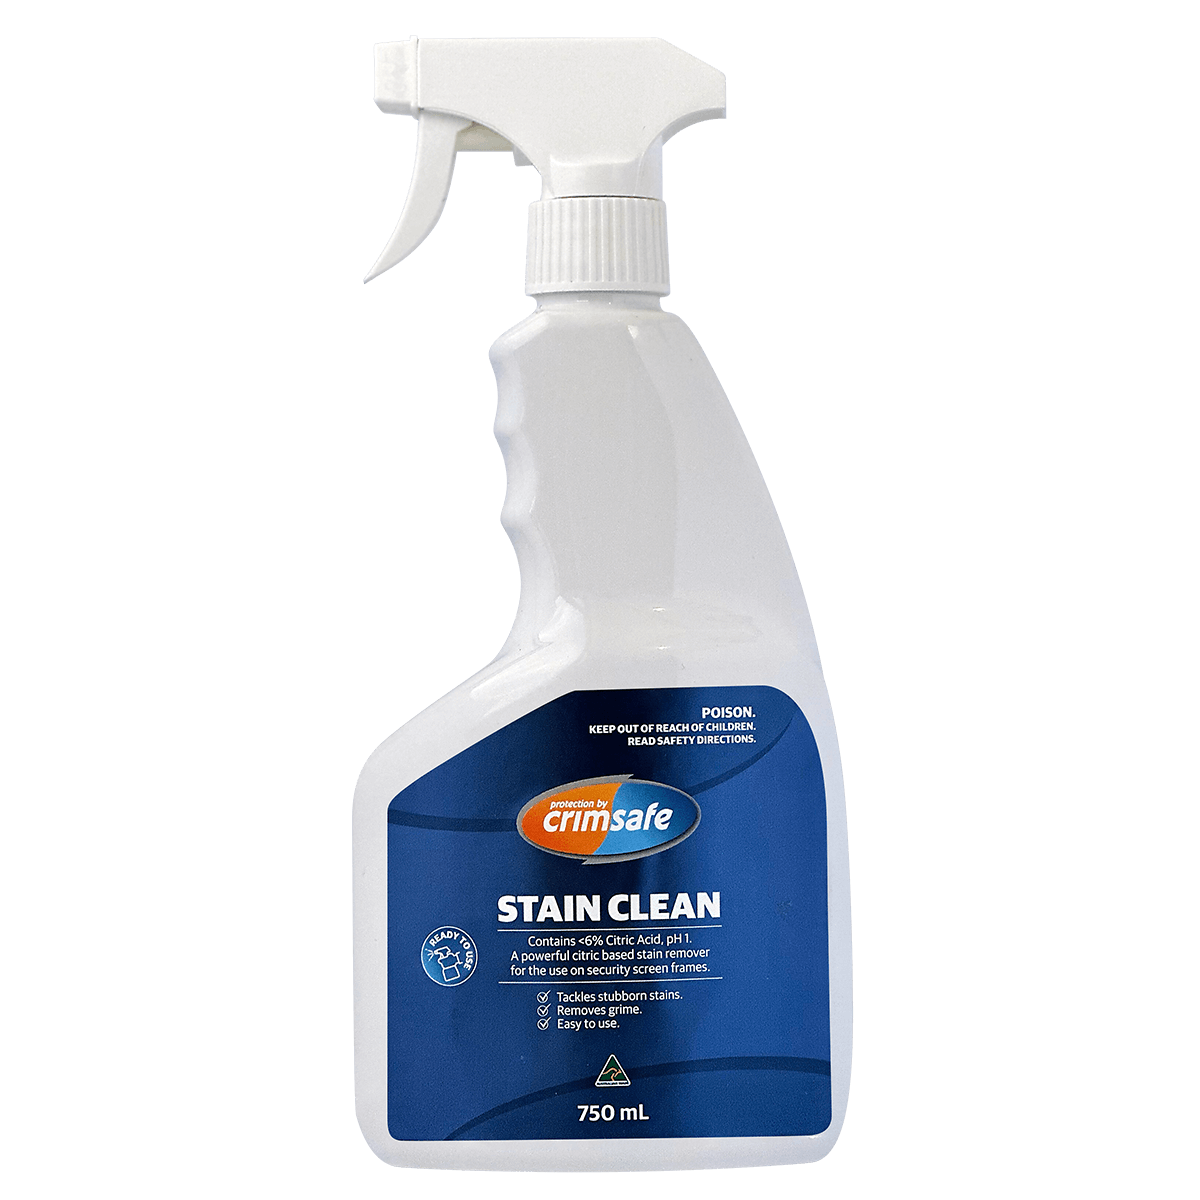 Crimsafe Stain Clean Ready to Use - 750ml